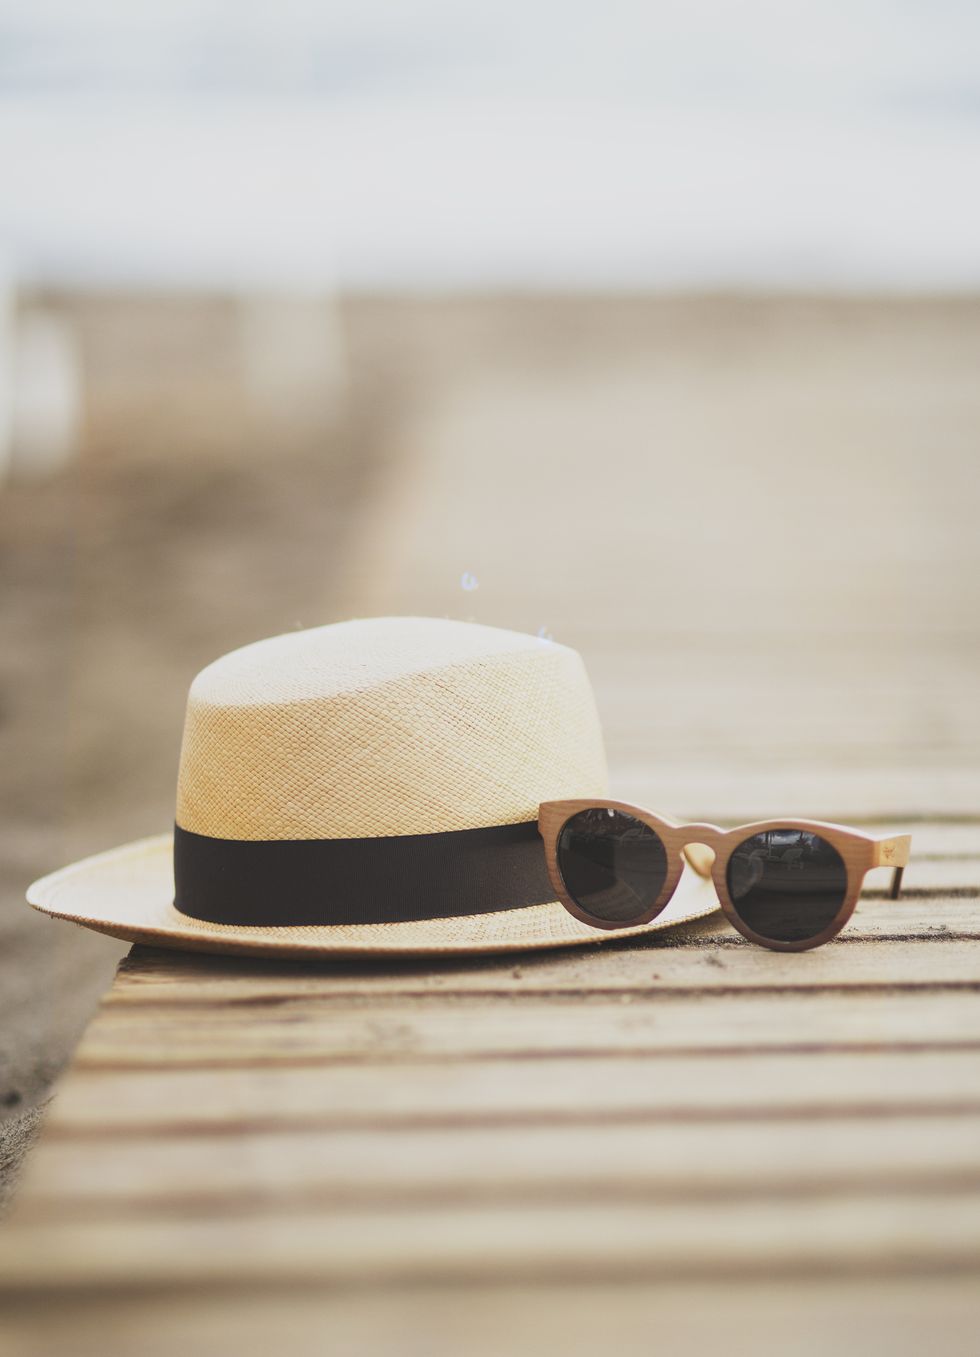 Straw hat and sunglasses on beach